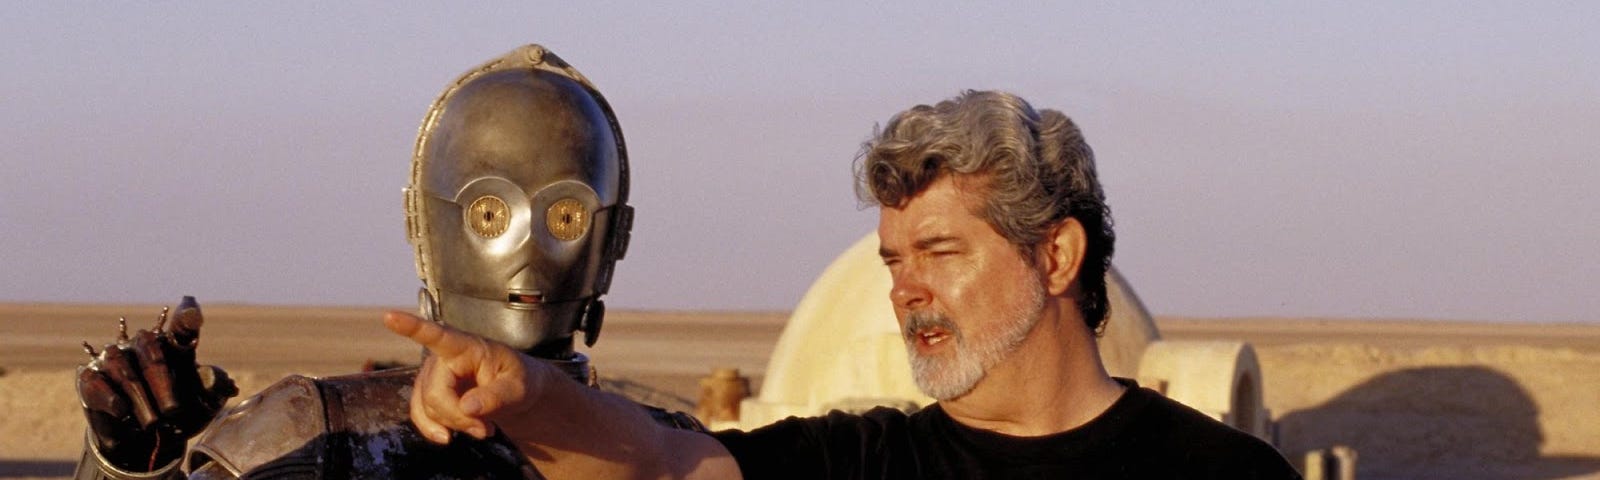 A still from one of the more recent Star Wars movies sets, with the robot C3P0 stood next to George Lucas, who is pointing off screen.